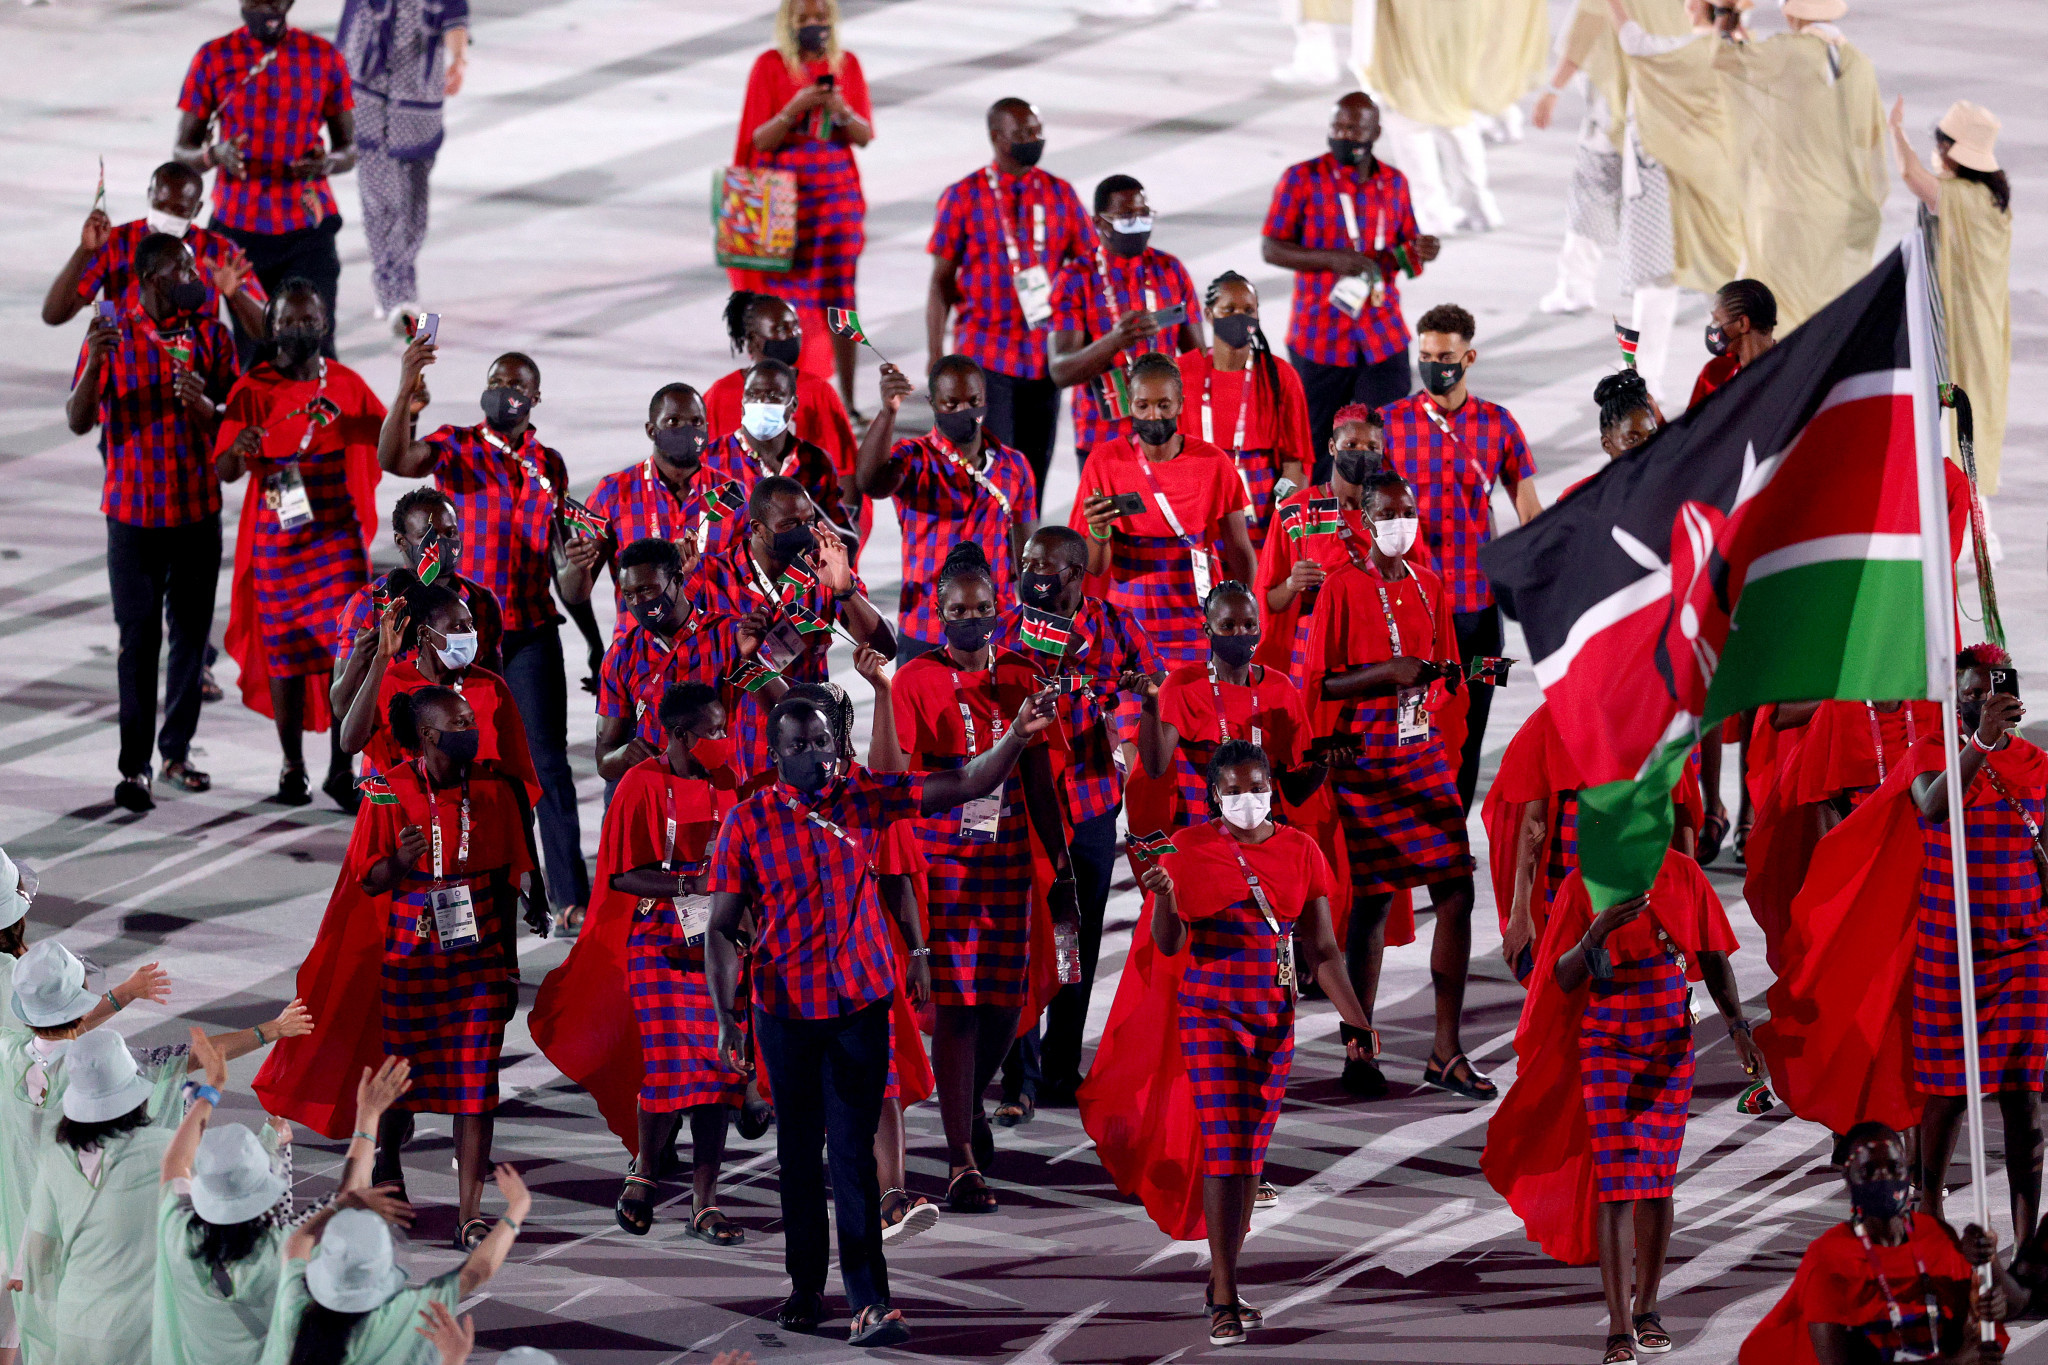 National Olympic Committee of Kenya hopes pre-Paris 2024 training camp can help athletes to "acclimatise"